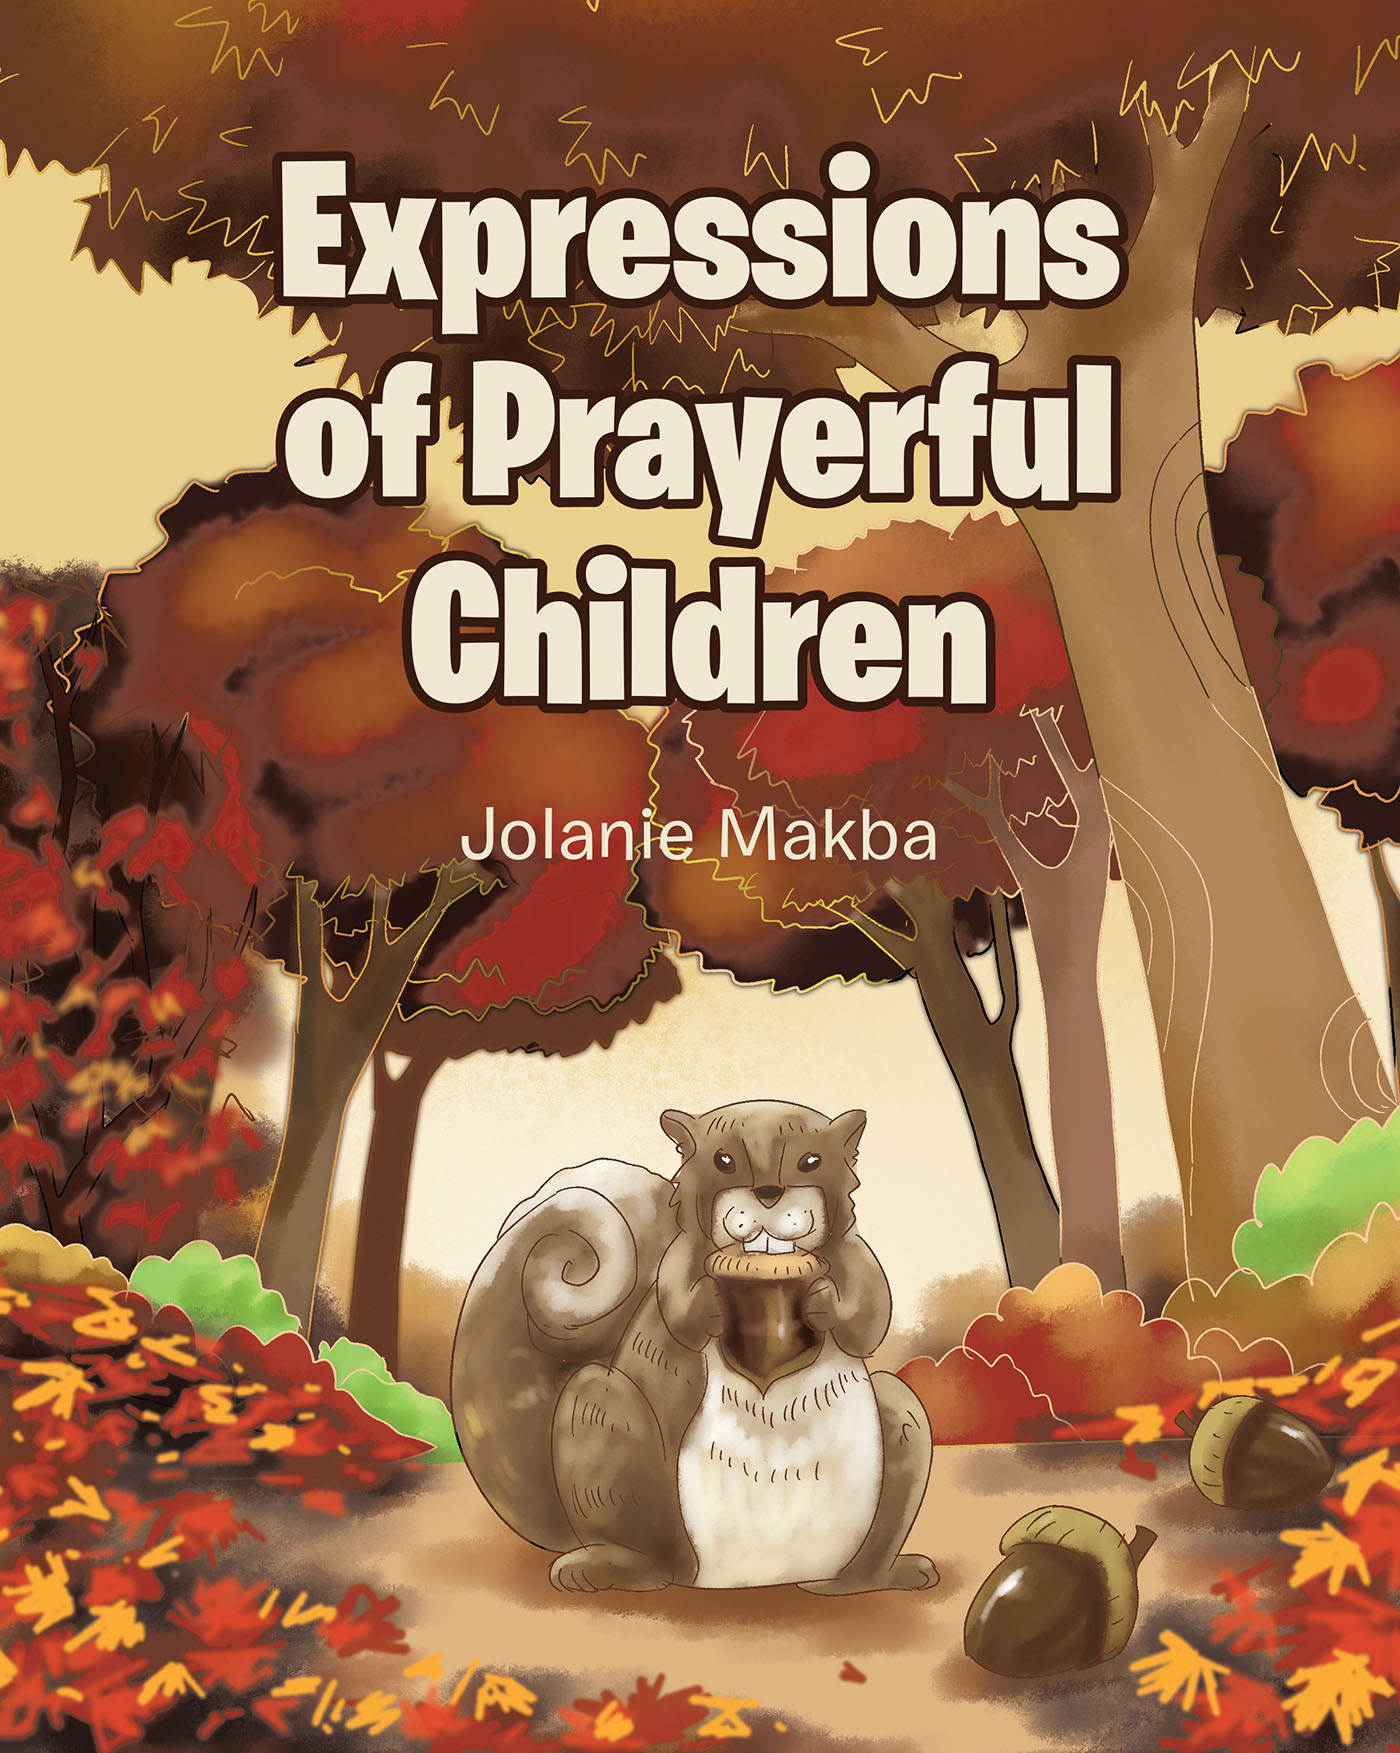 Jolanie Makba’s Newly Released "Expressions of Prayerful Children" is an Expression of Gratitude for the Wonder of God’s Creation